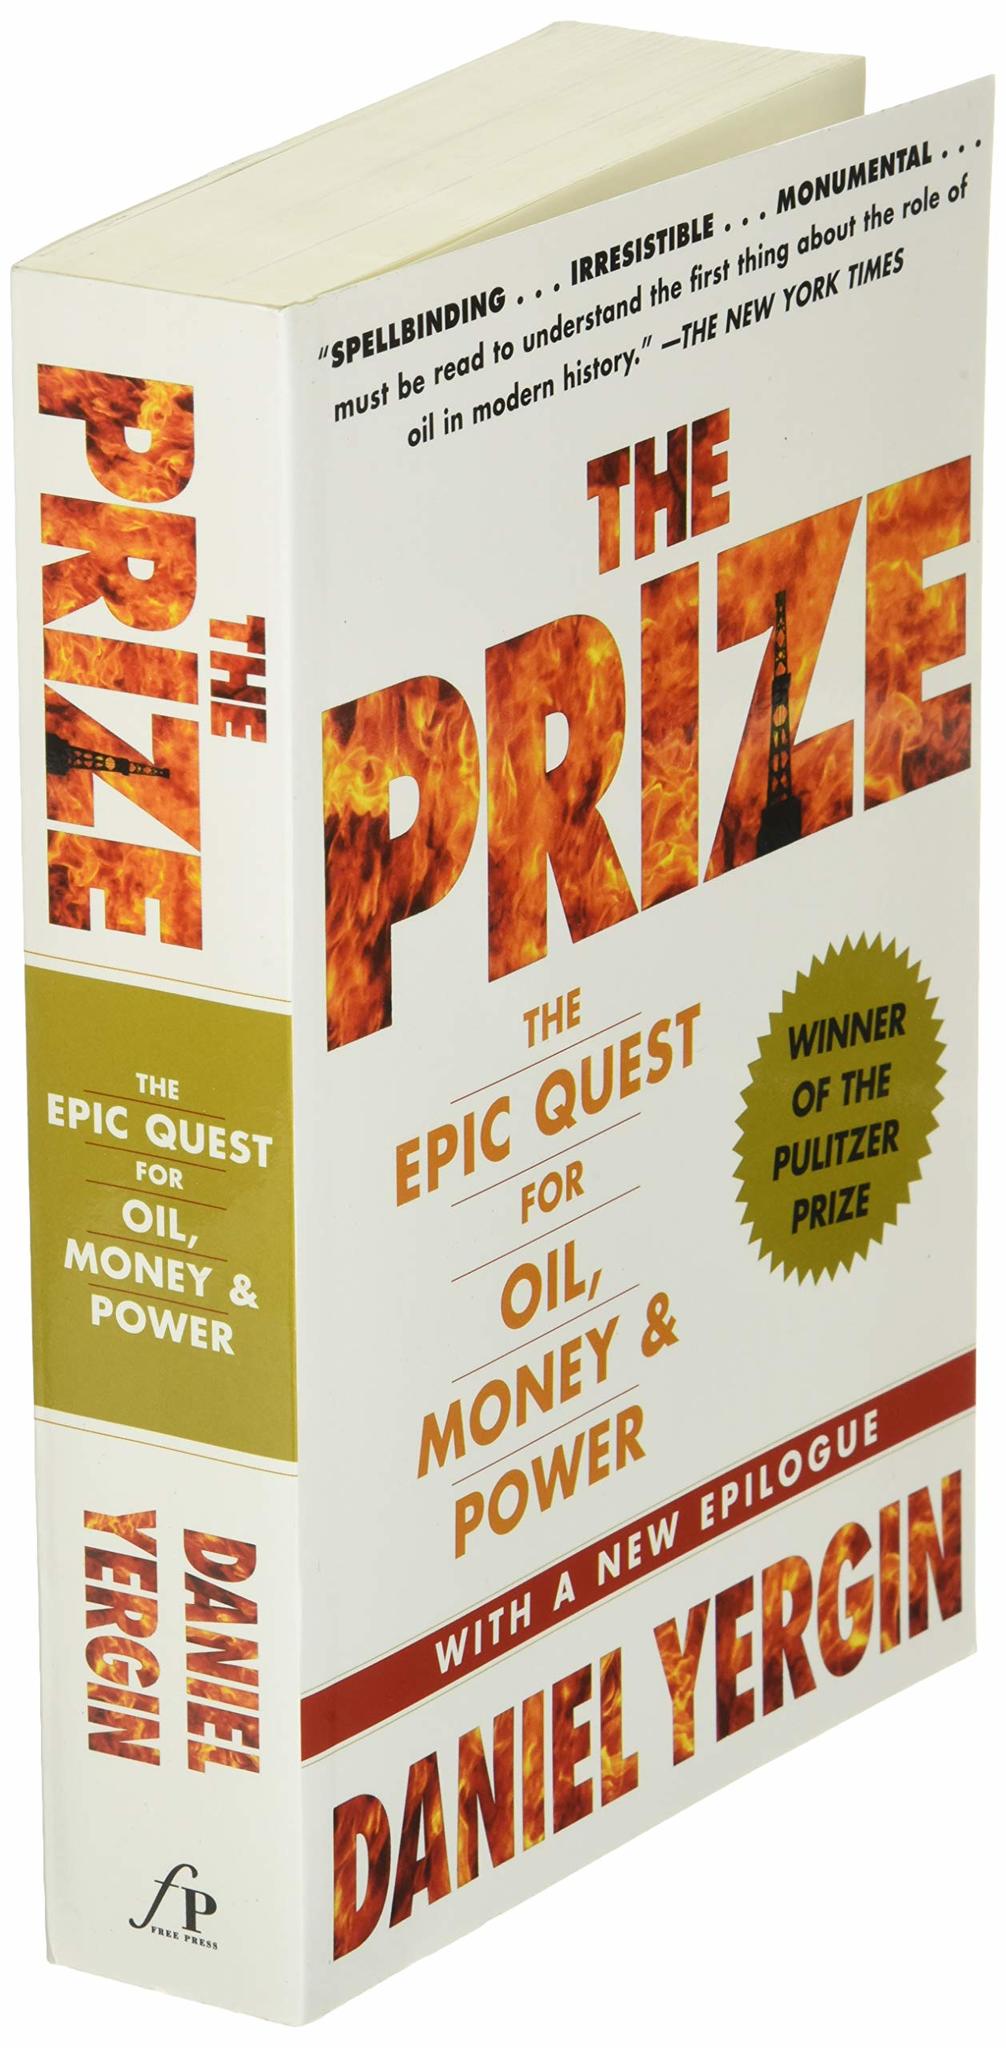 Daniel　Epic　Power　Yergin　Quest　Book　9781847376466　Oil,　for　The　The　Prize　Money